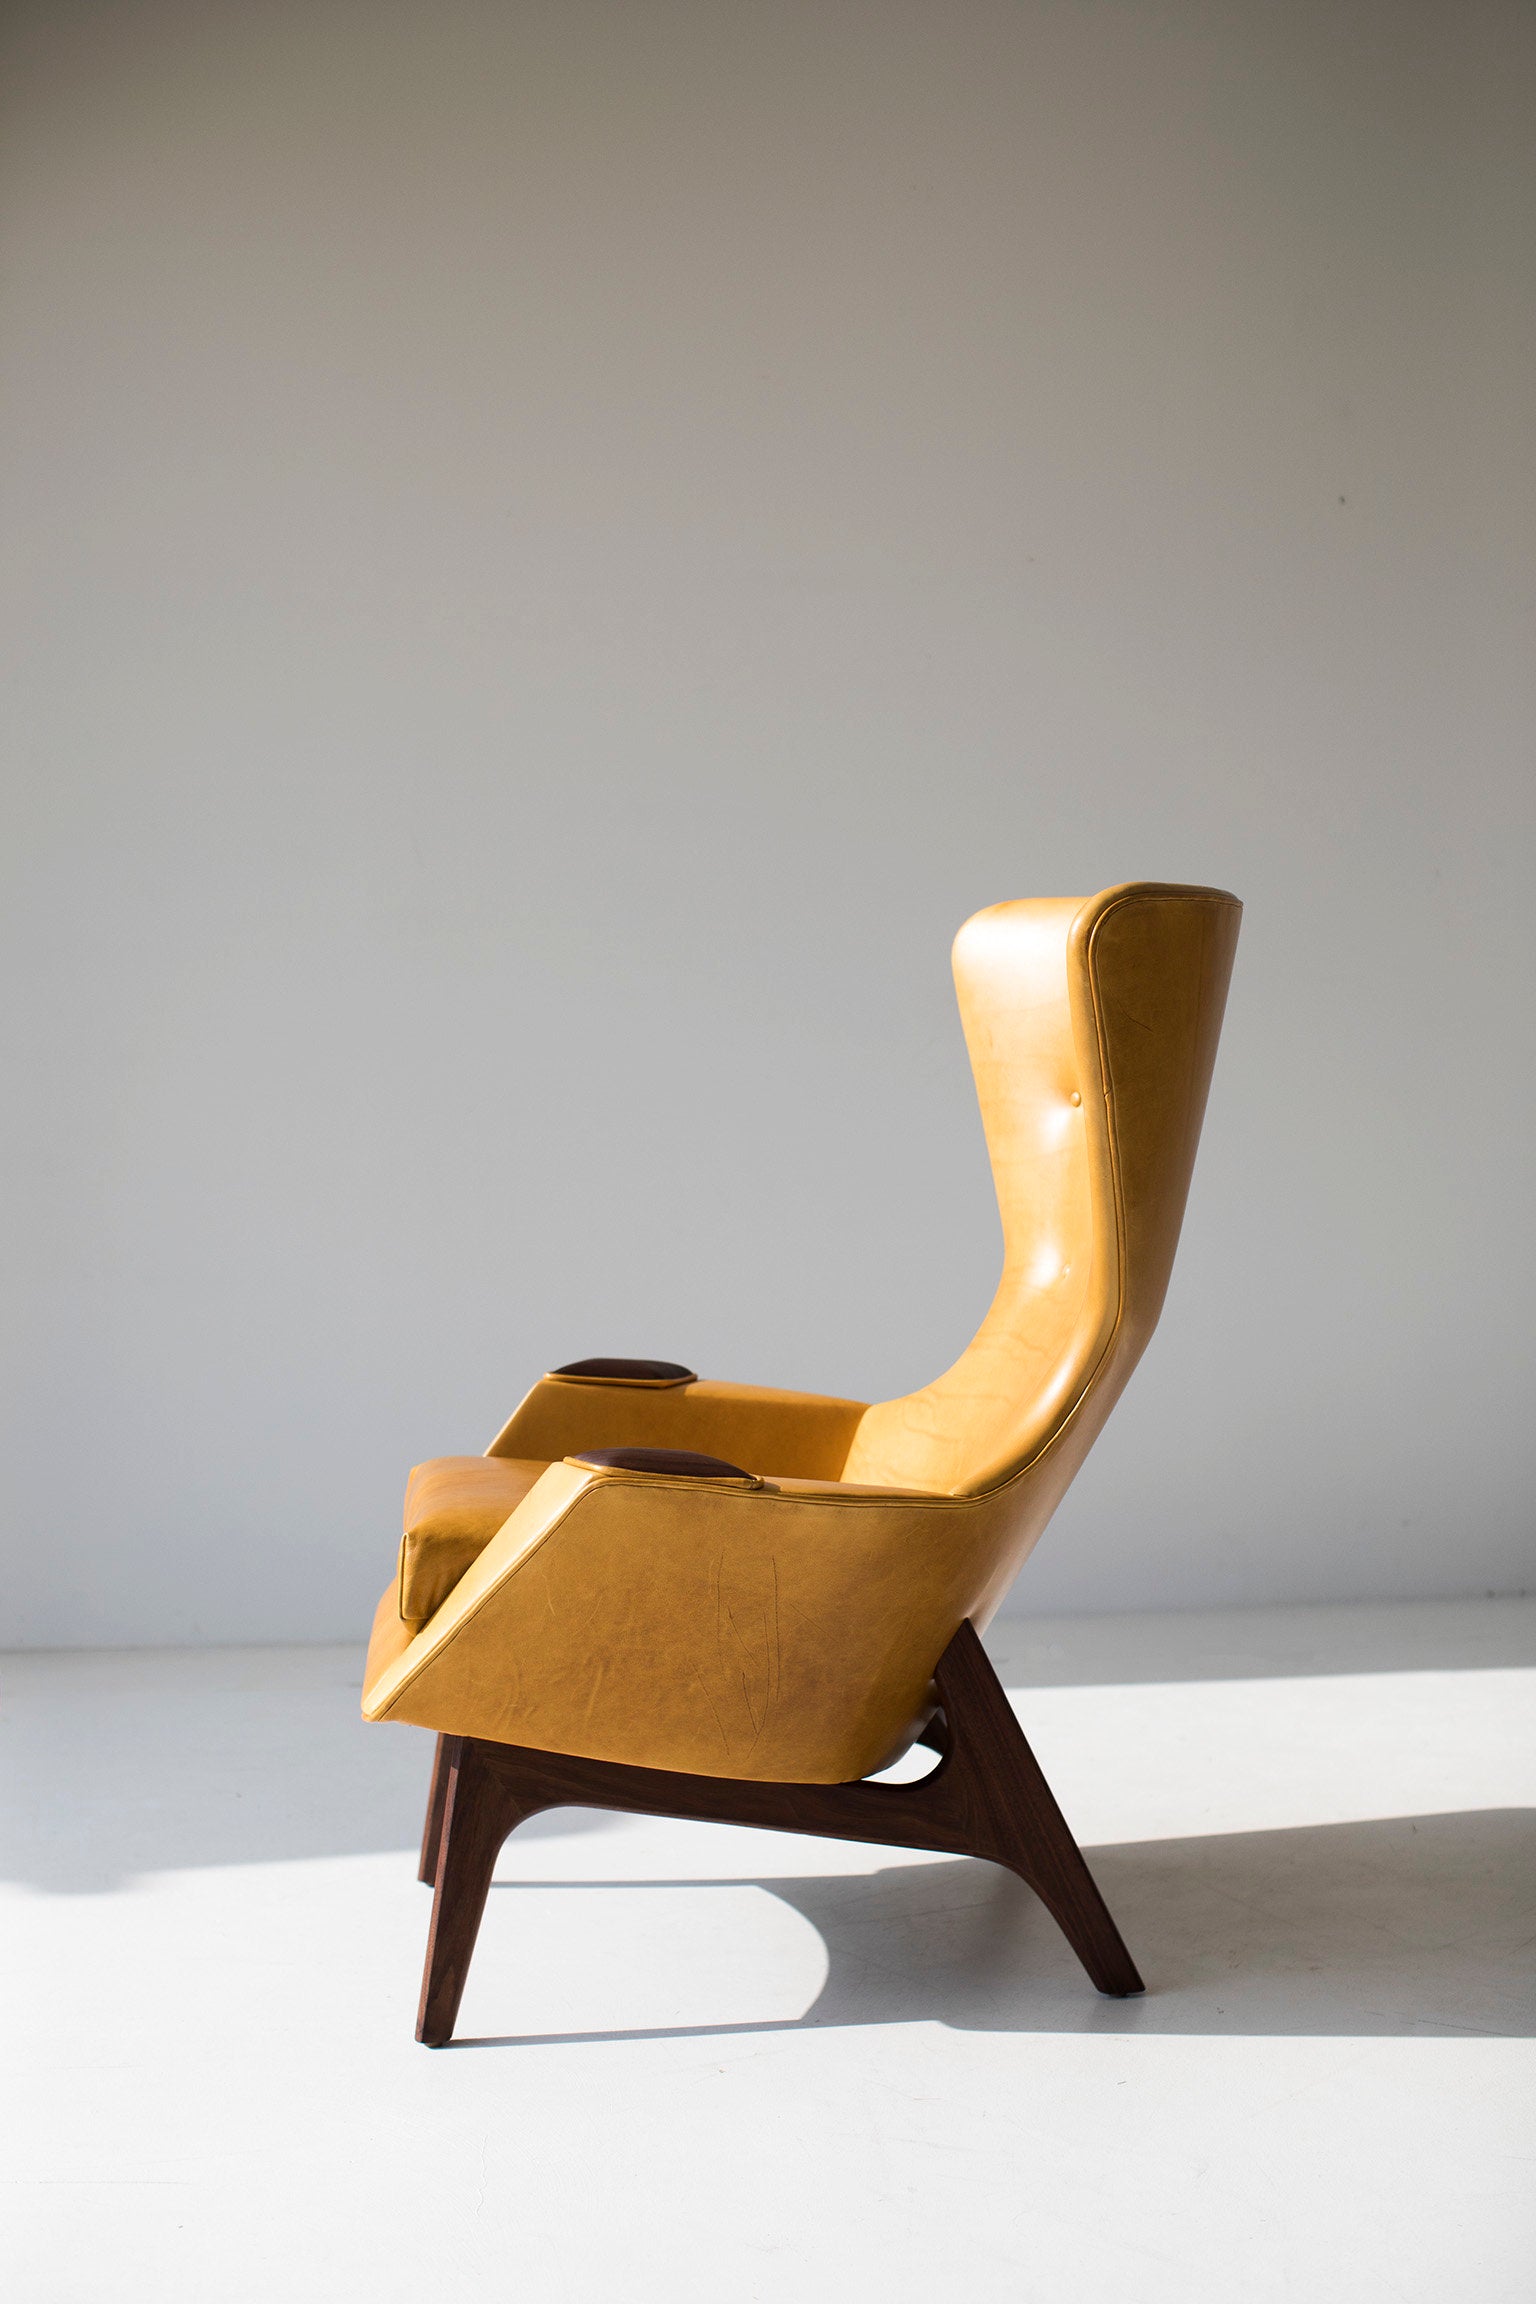 The Golden Wing Chair - 1410